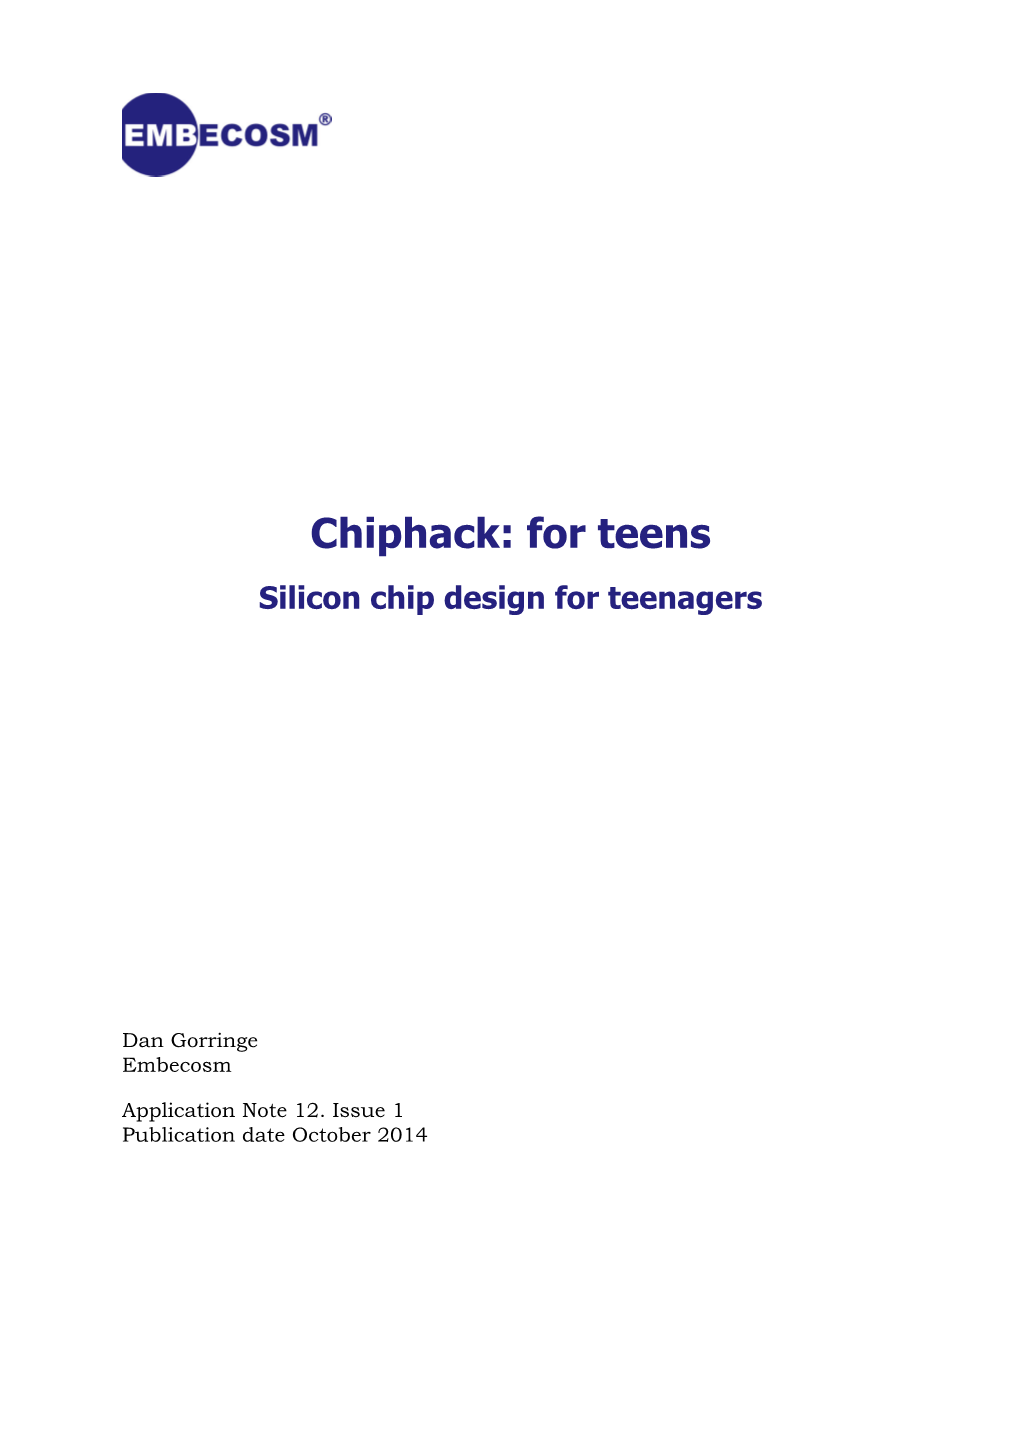 Chiphack: for Teens Silicon Chip Design for Teenagers